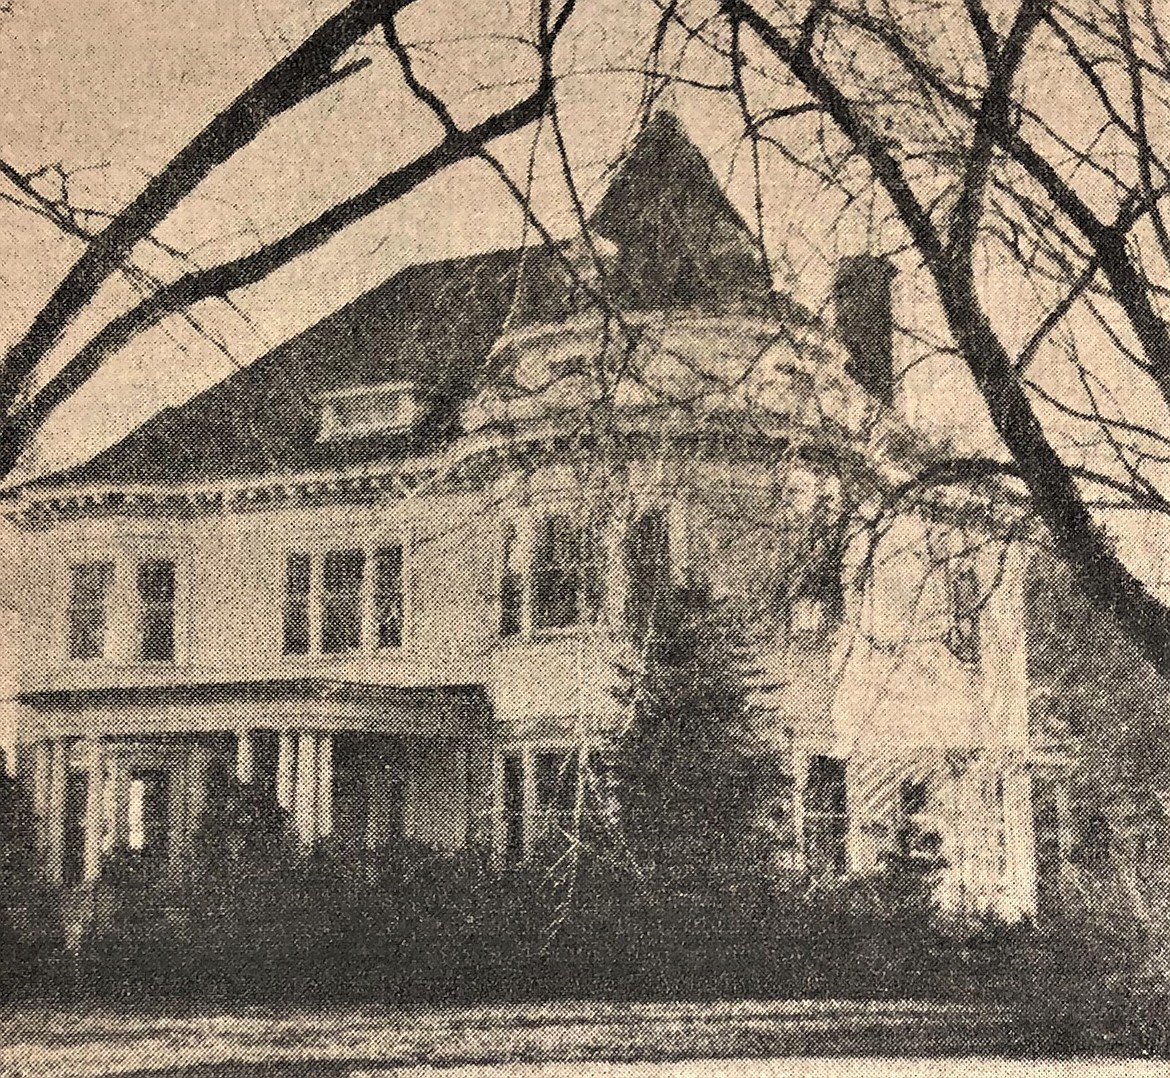 The Koury/Edmonds house that once stood at 816 Sherman Ave.